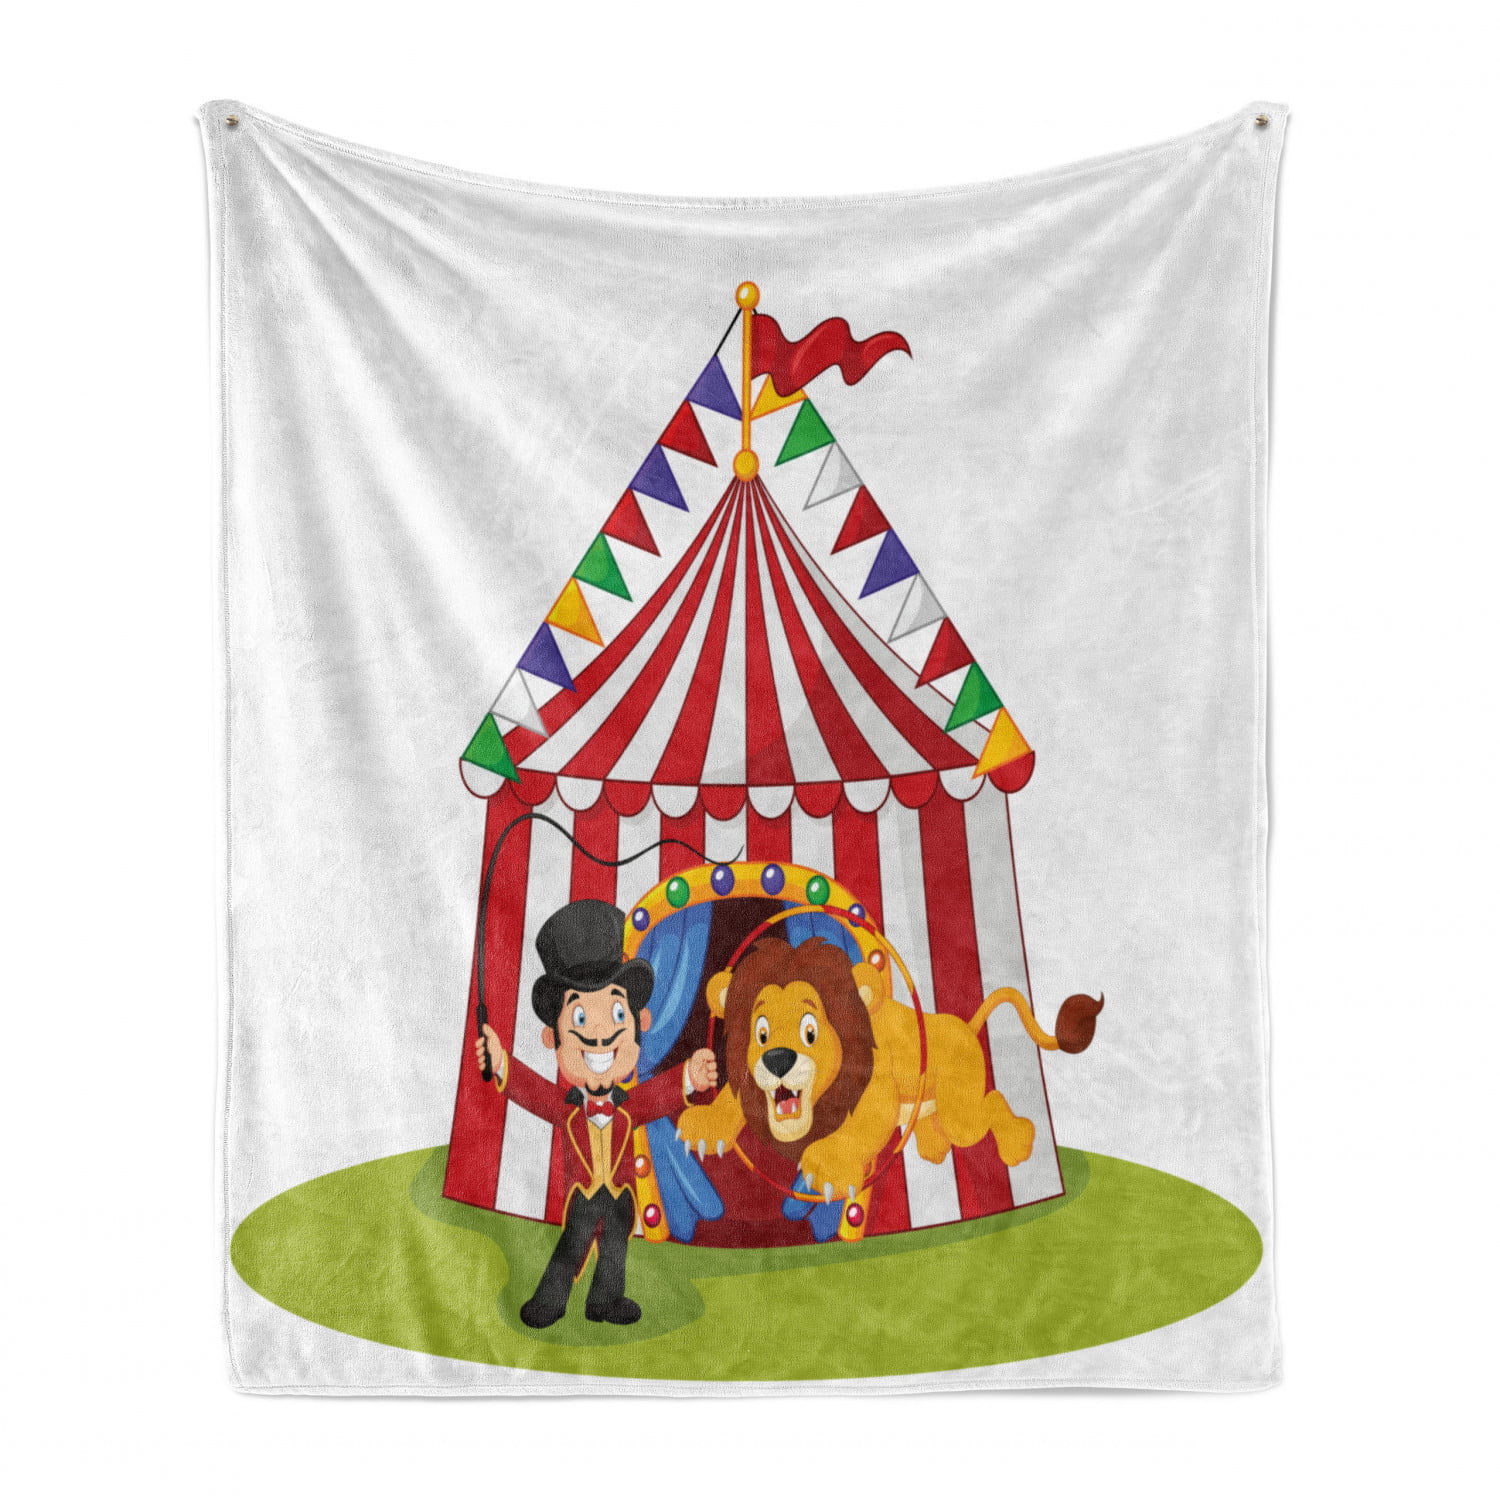 Multicolor Lion Jumping Through The Ring with Circus Tent Celebration Performance Show Ambesonne Circus Soft Flannel Fleece Throw Blanket 50 x 60 Cozy Plush for Indoor and Outdoor Use 